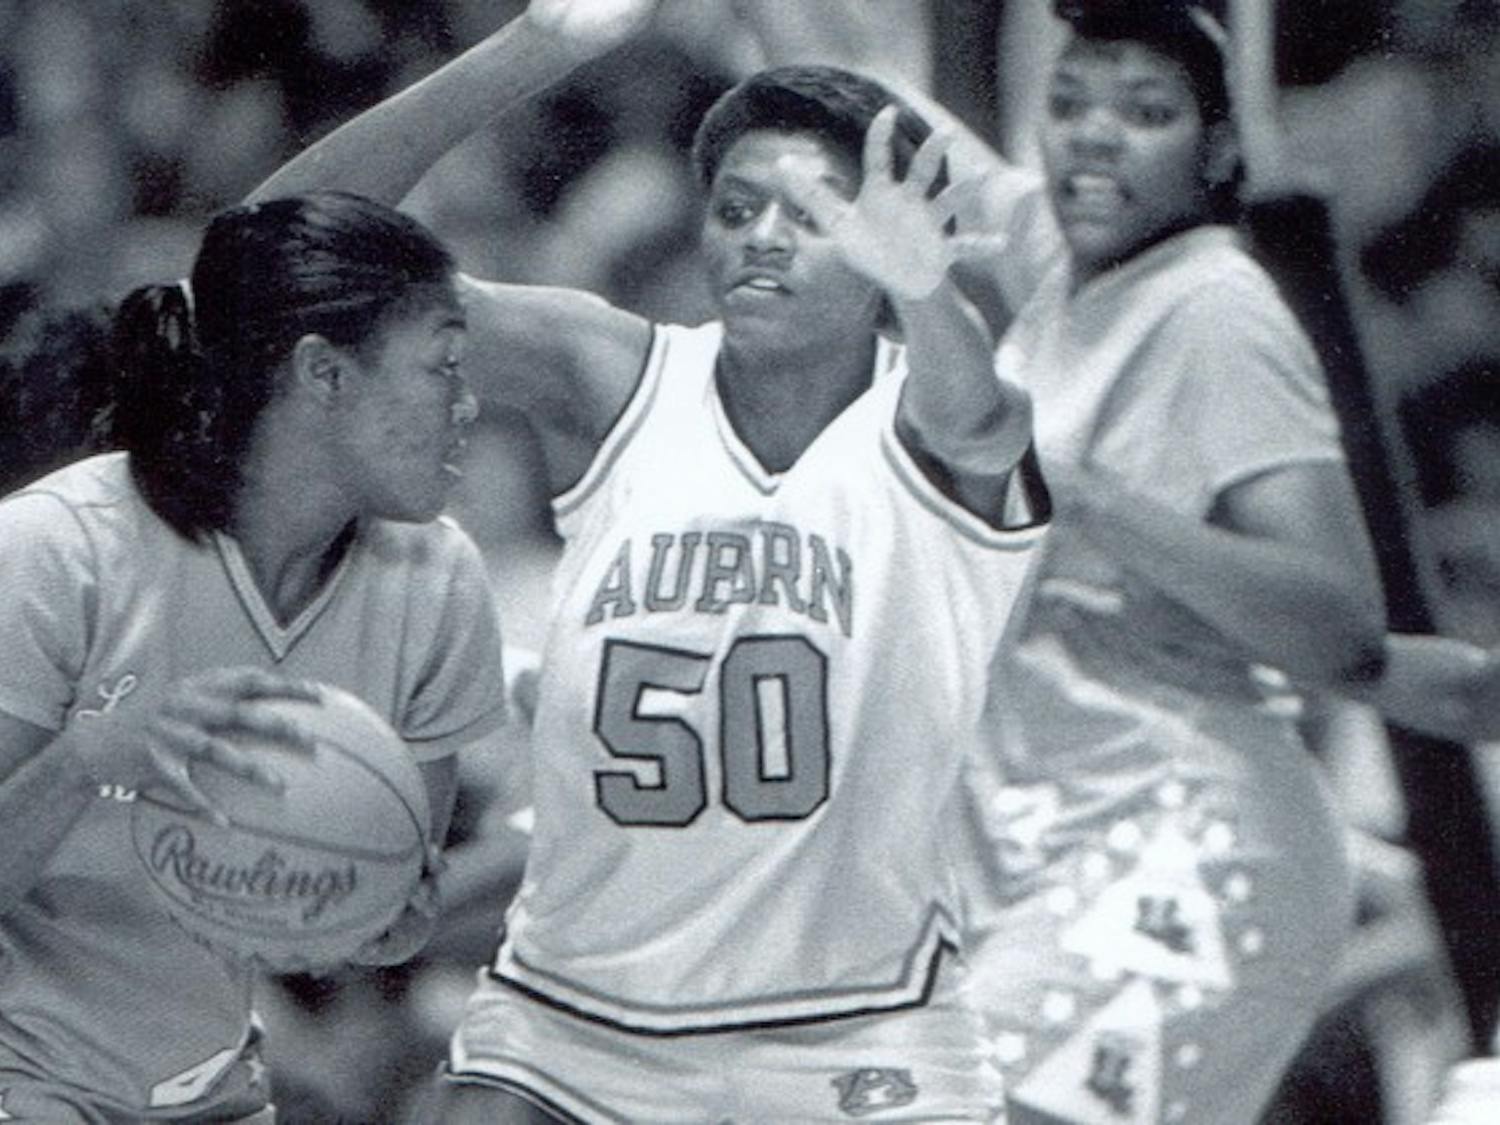 Vickie Orr (50) was a three-time All-American in the late 1980's at Auburn.